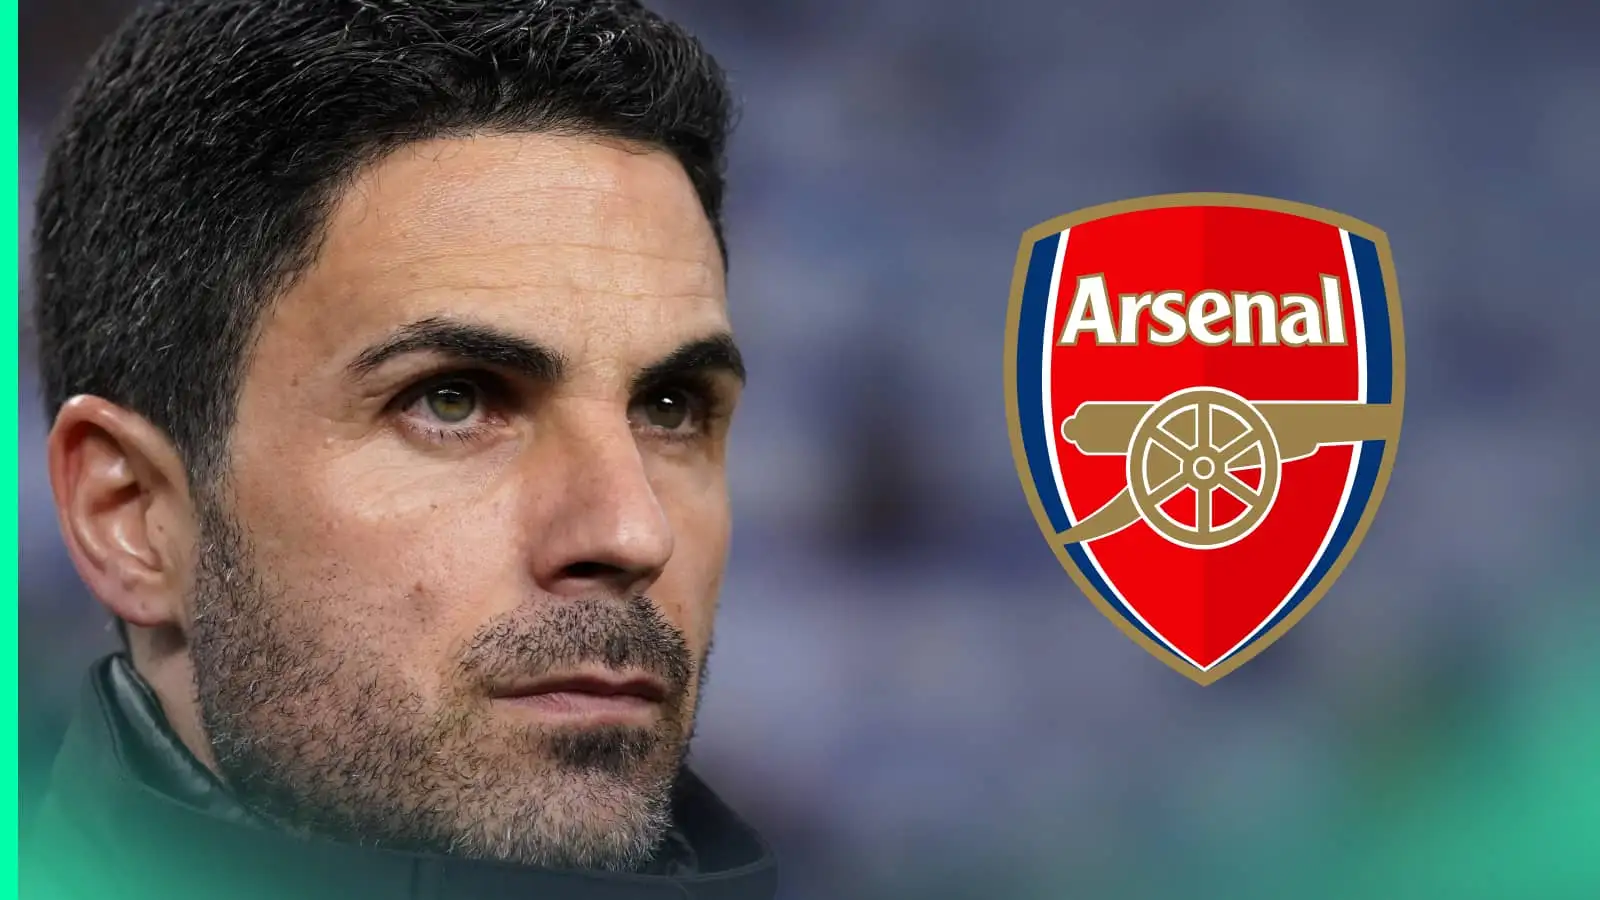 A close-up shot of Mikel Arteta with a prominent Arsenal badge alongside him